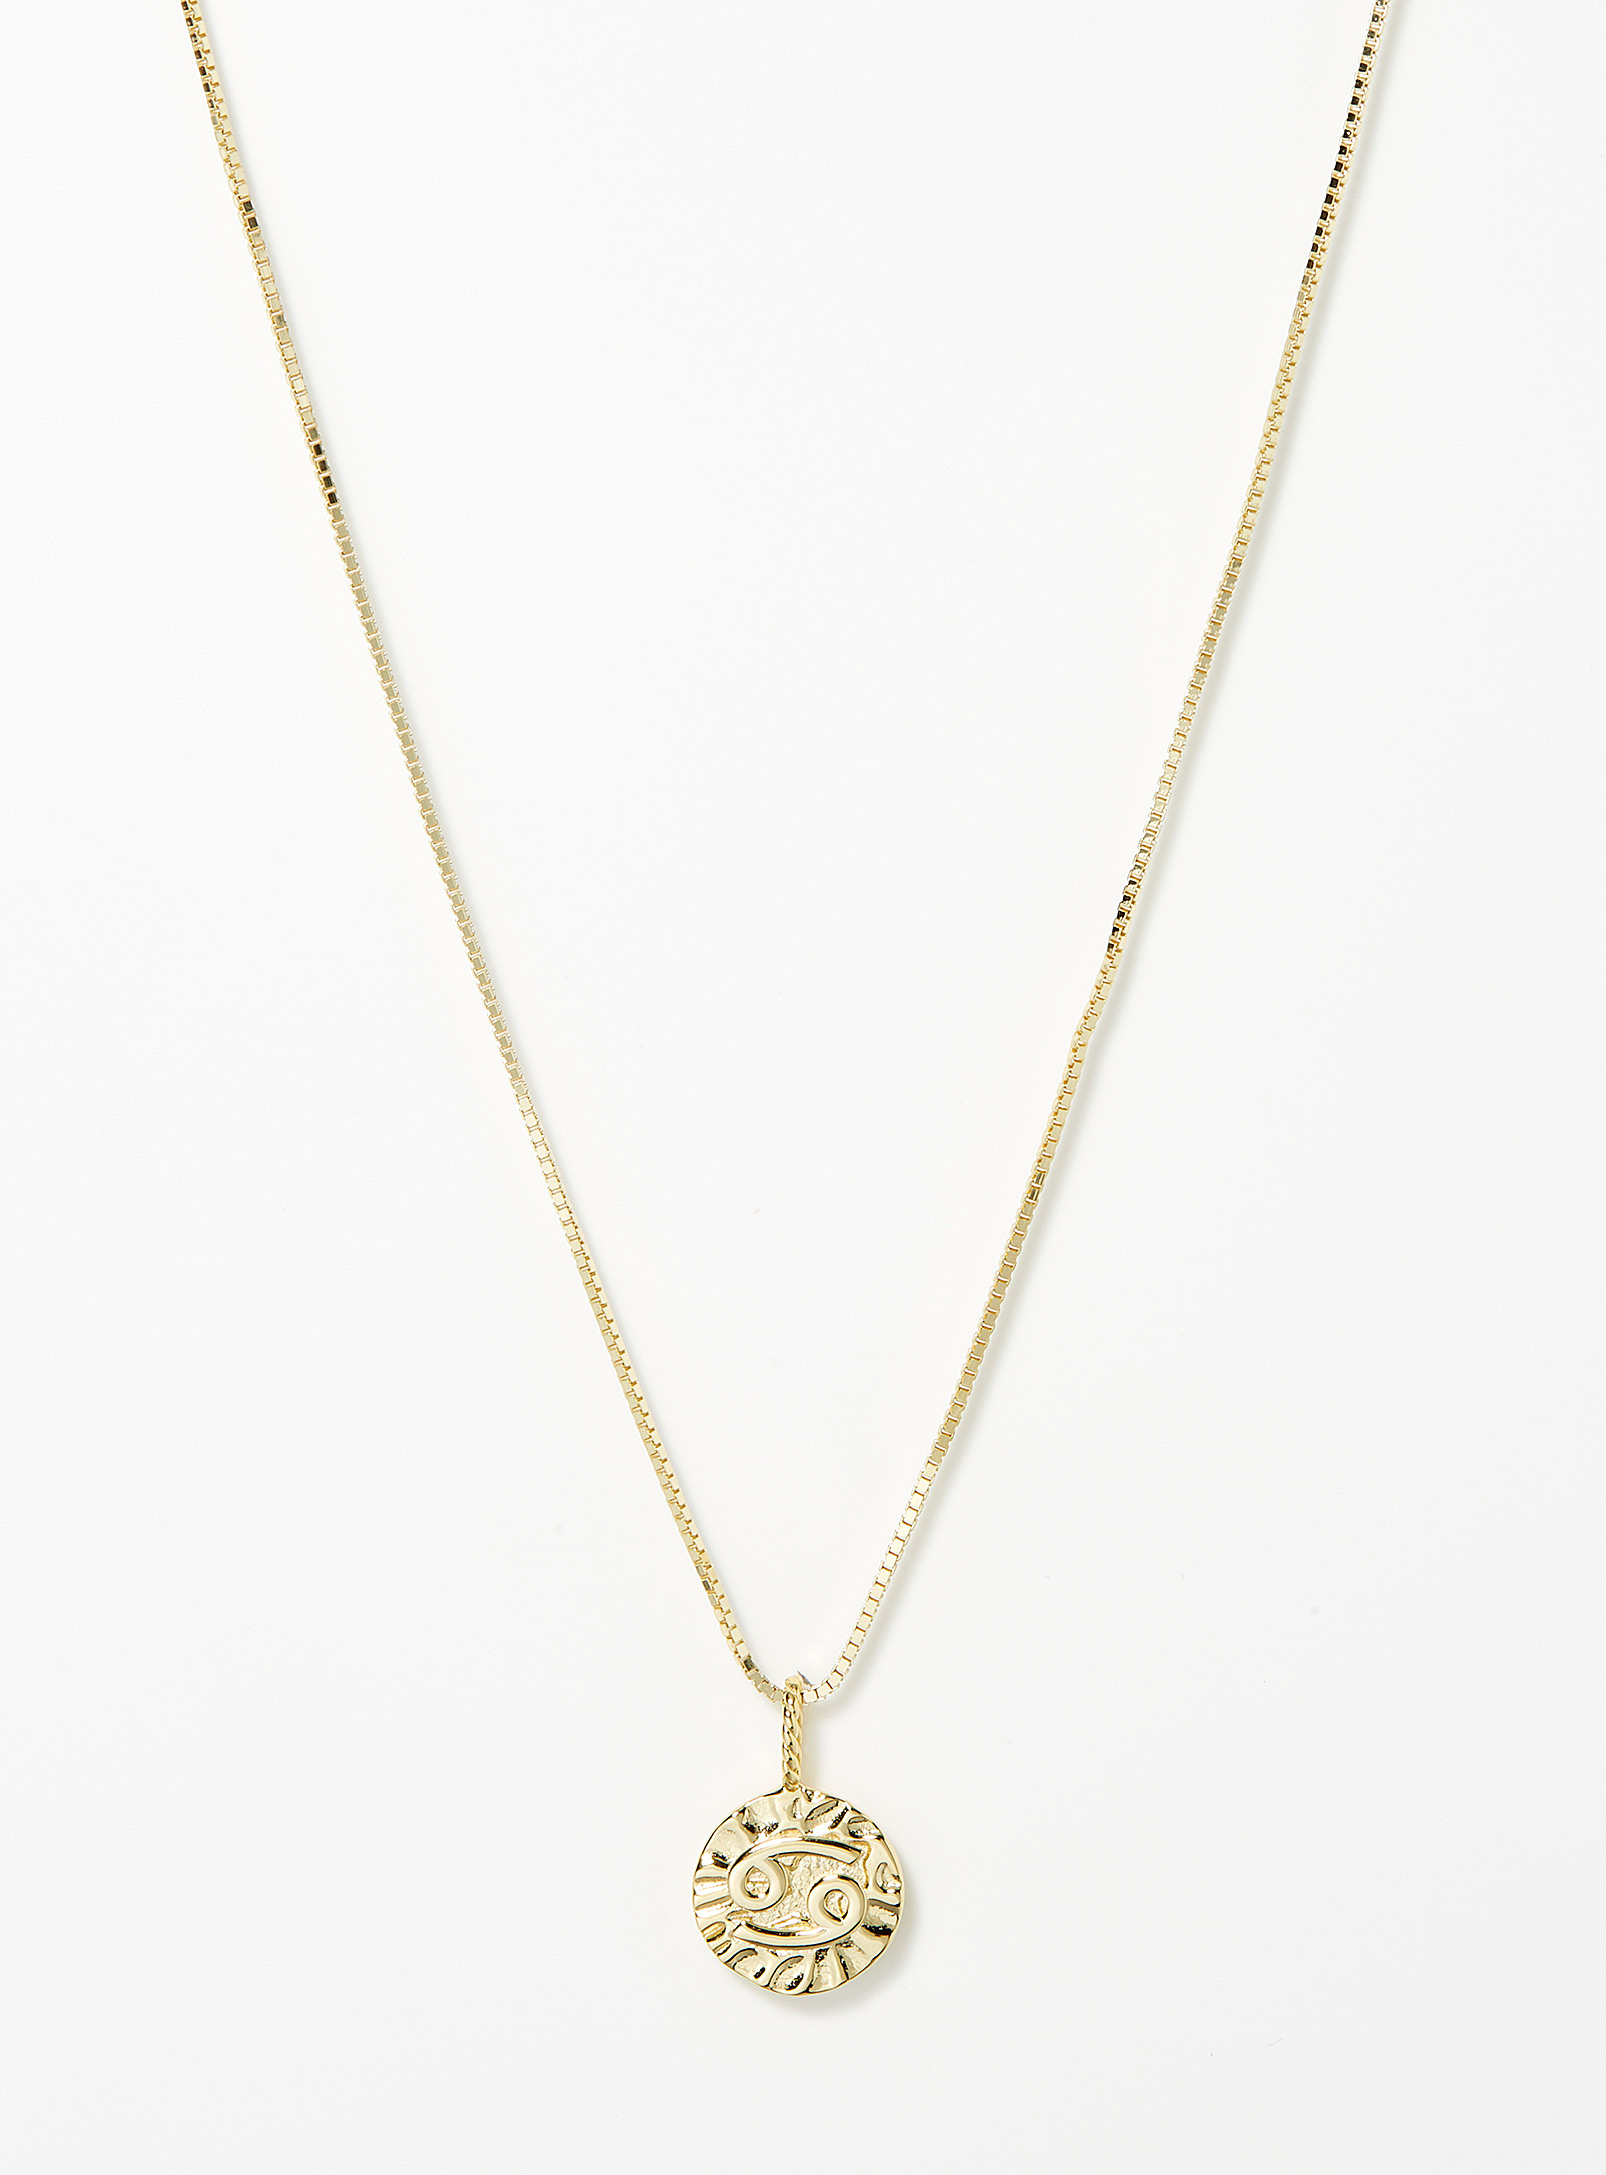 Midi34 X Simons Shimmery Astro Necklace In Silver